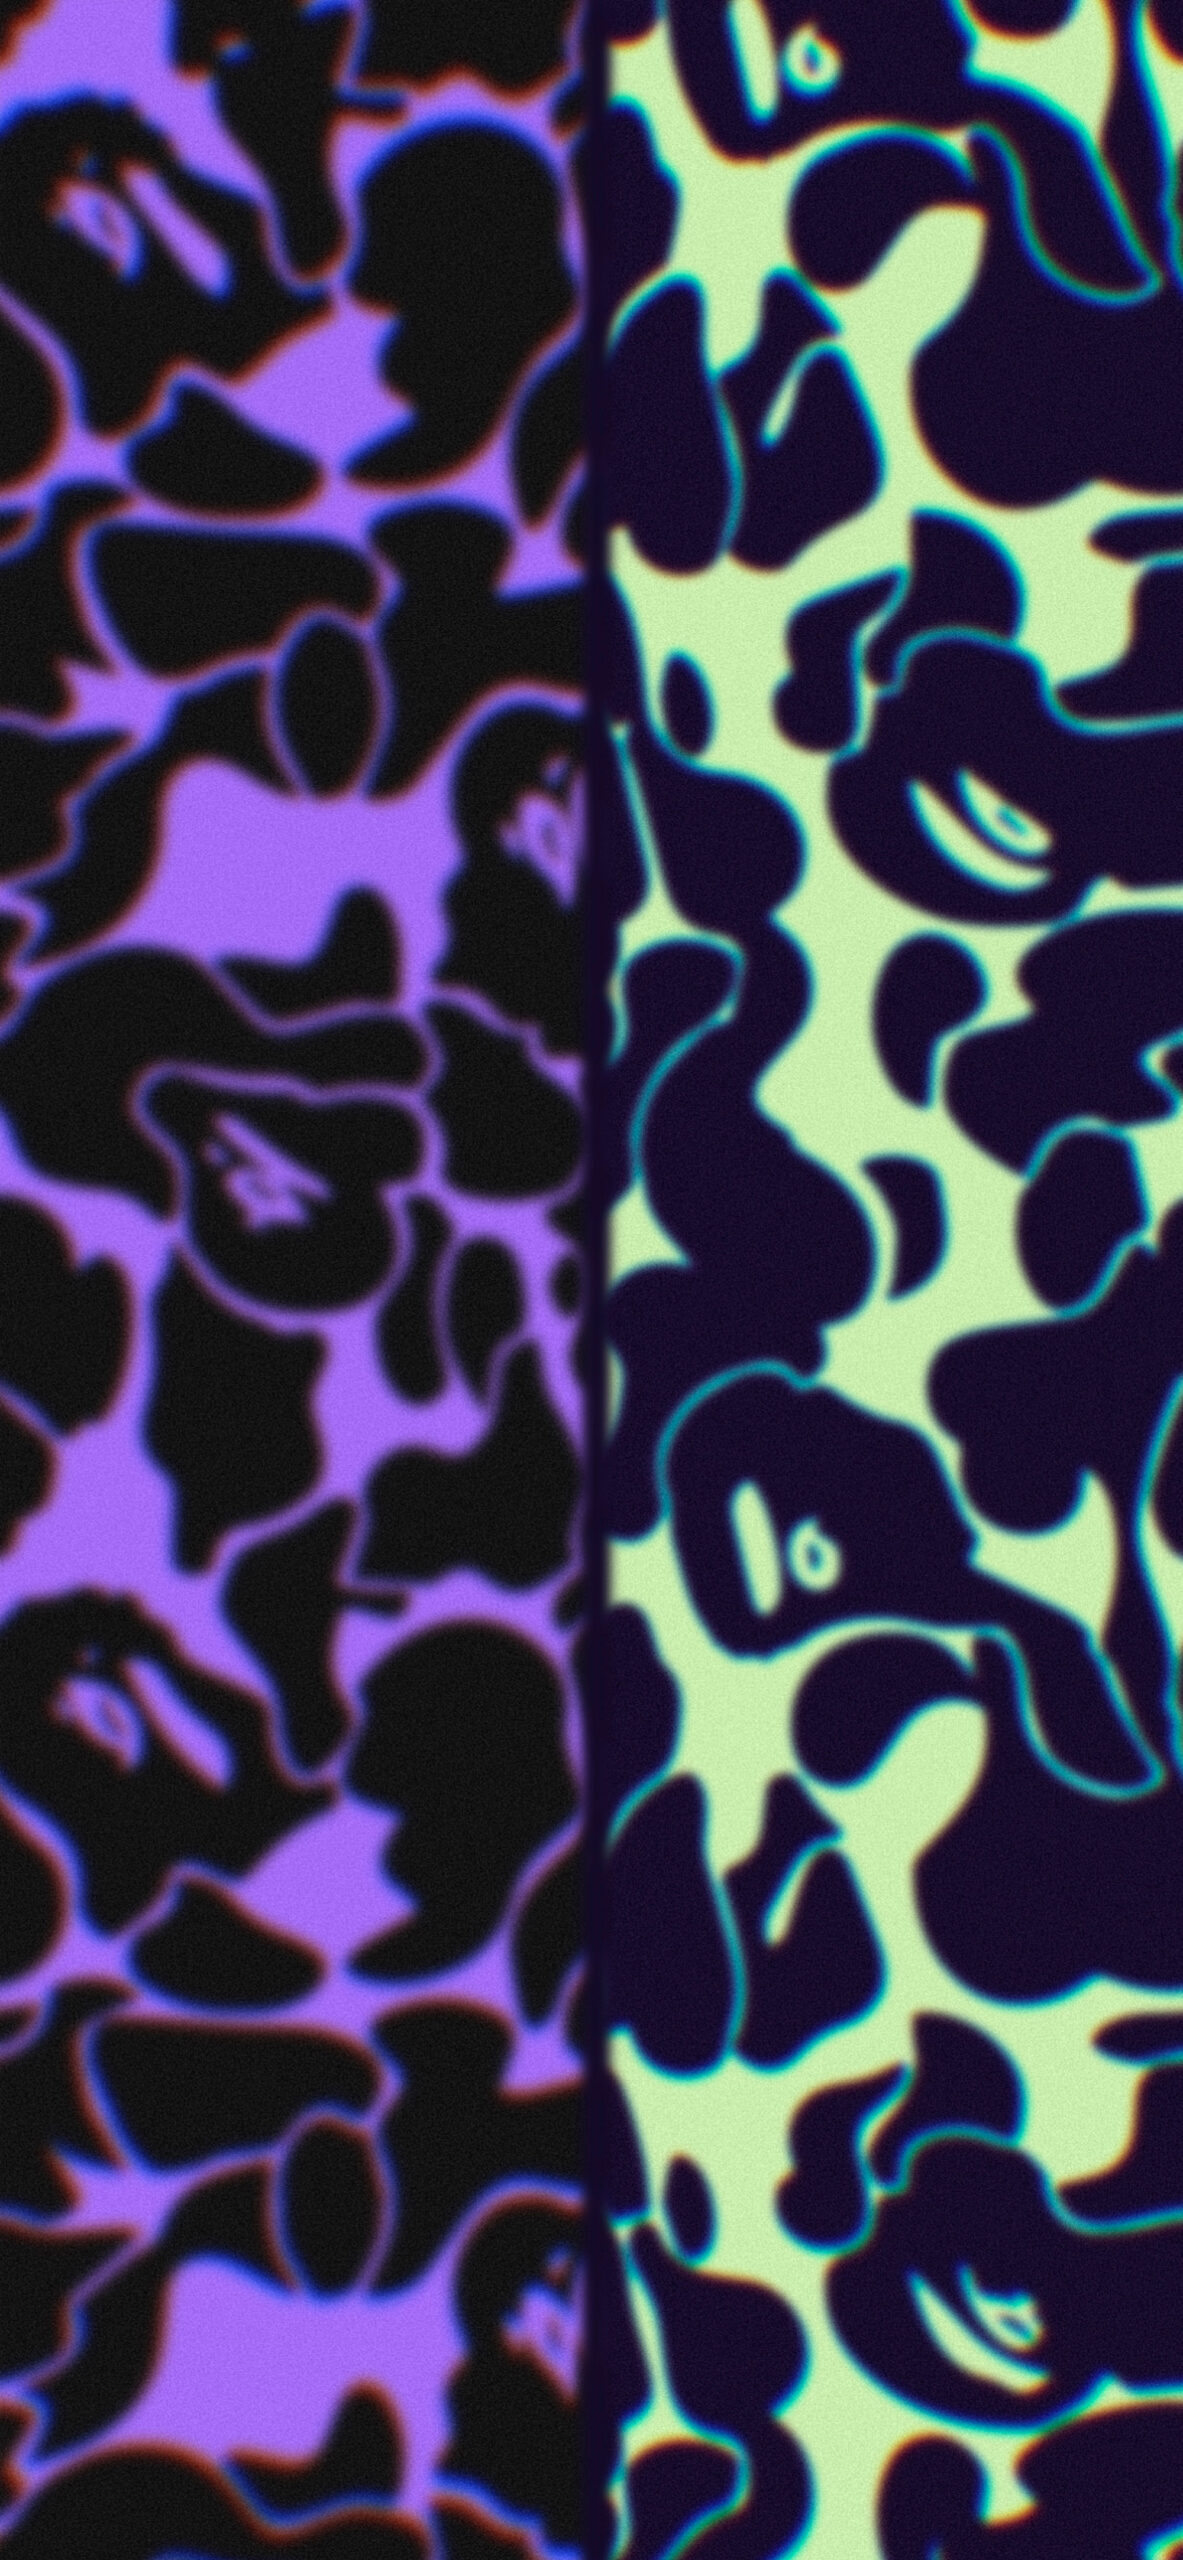 Bape Wallpaper With Shark Face On Camo Background